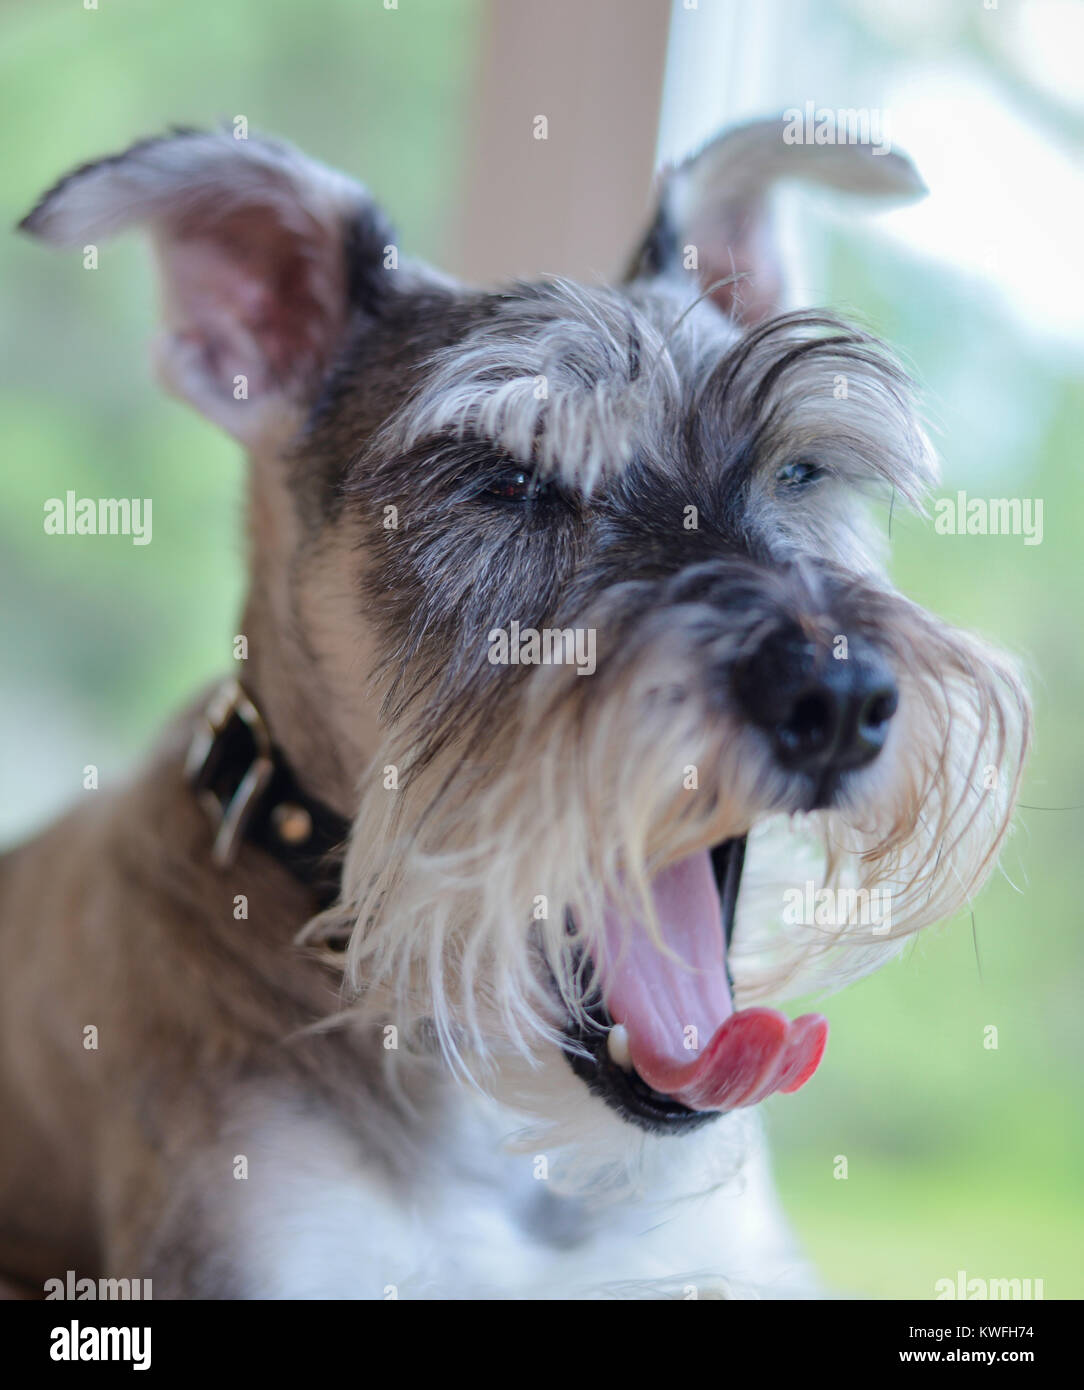 Vertical photo of a salt and pepper mini schnauzer yawning. His pink tongue is sticking out and curled. Focus is on eyes, with shallow depth of field Stock Photo